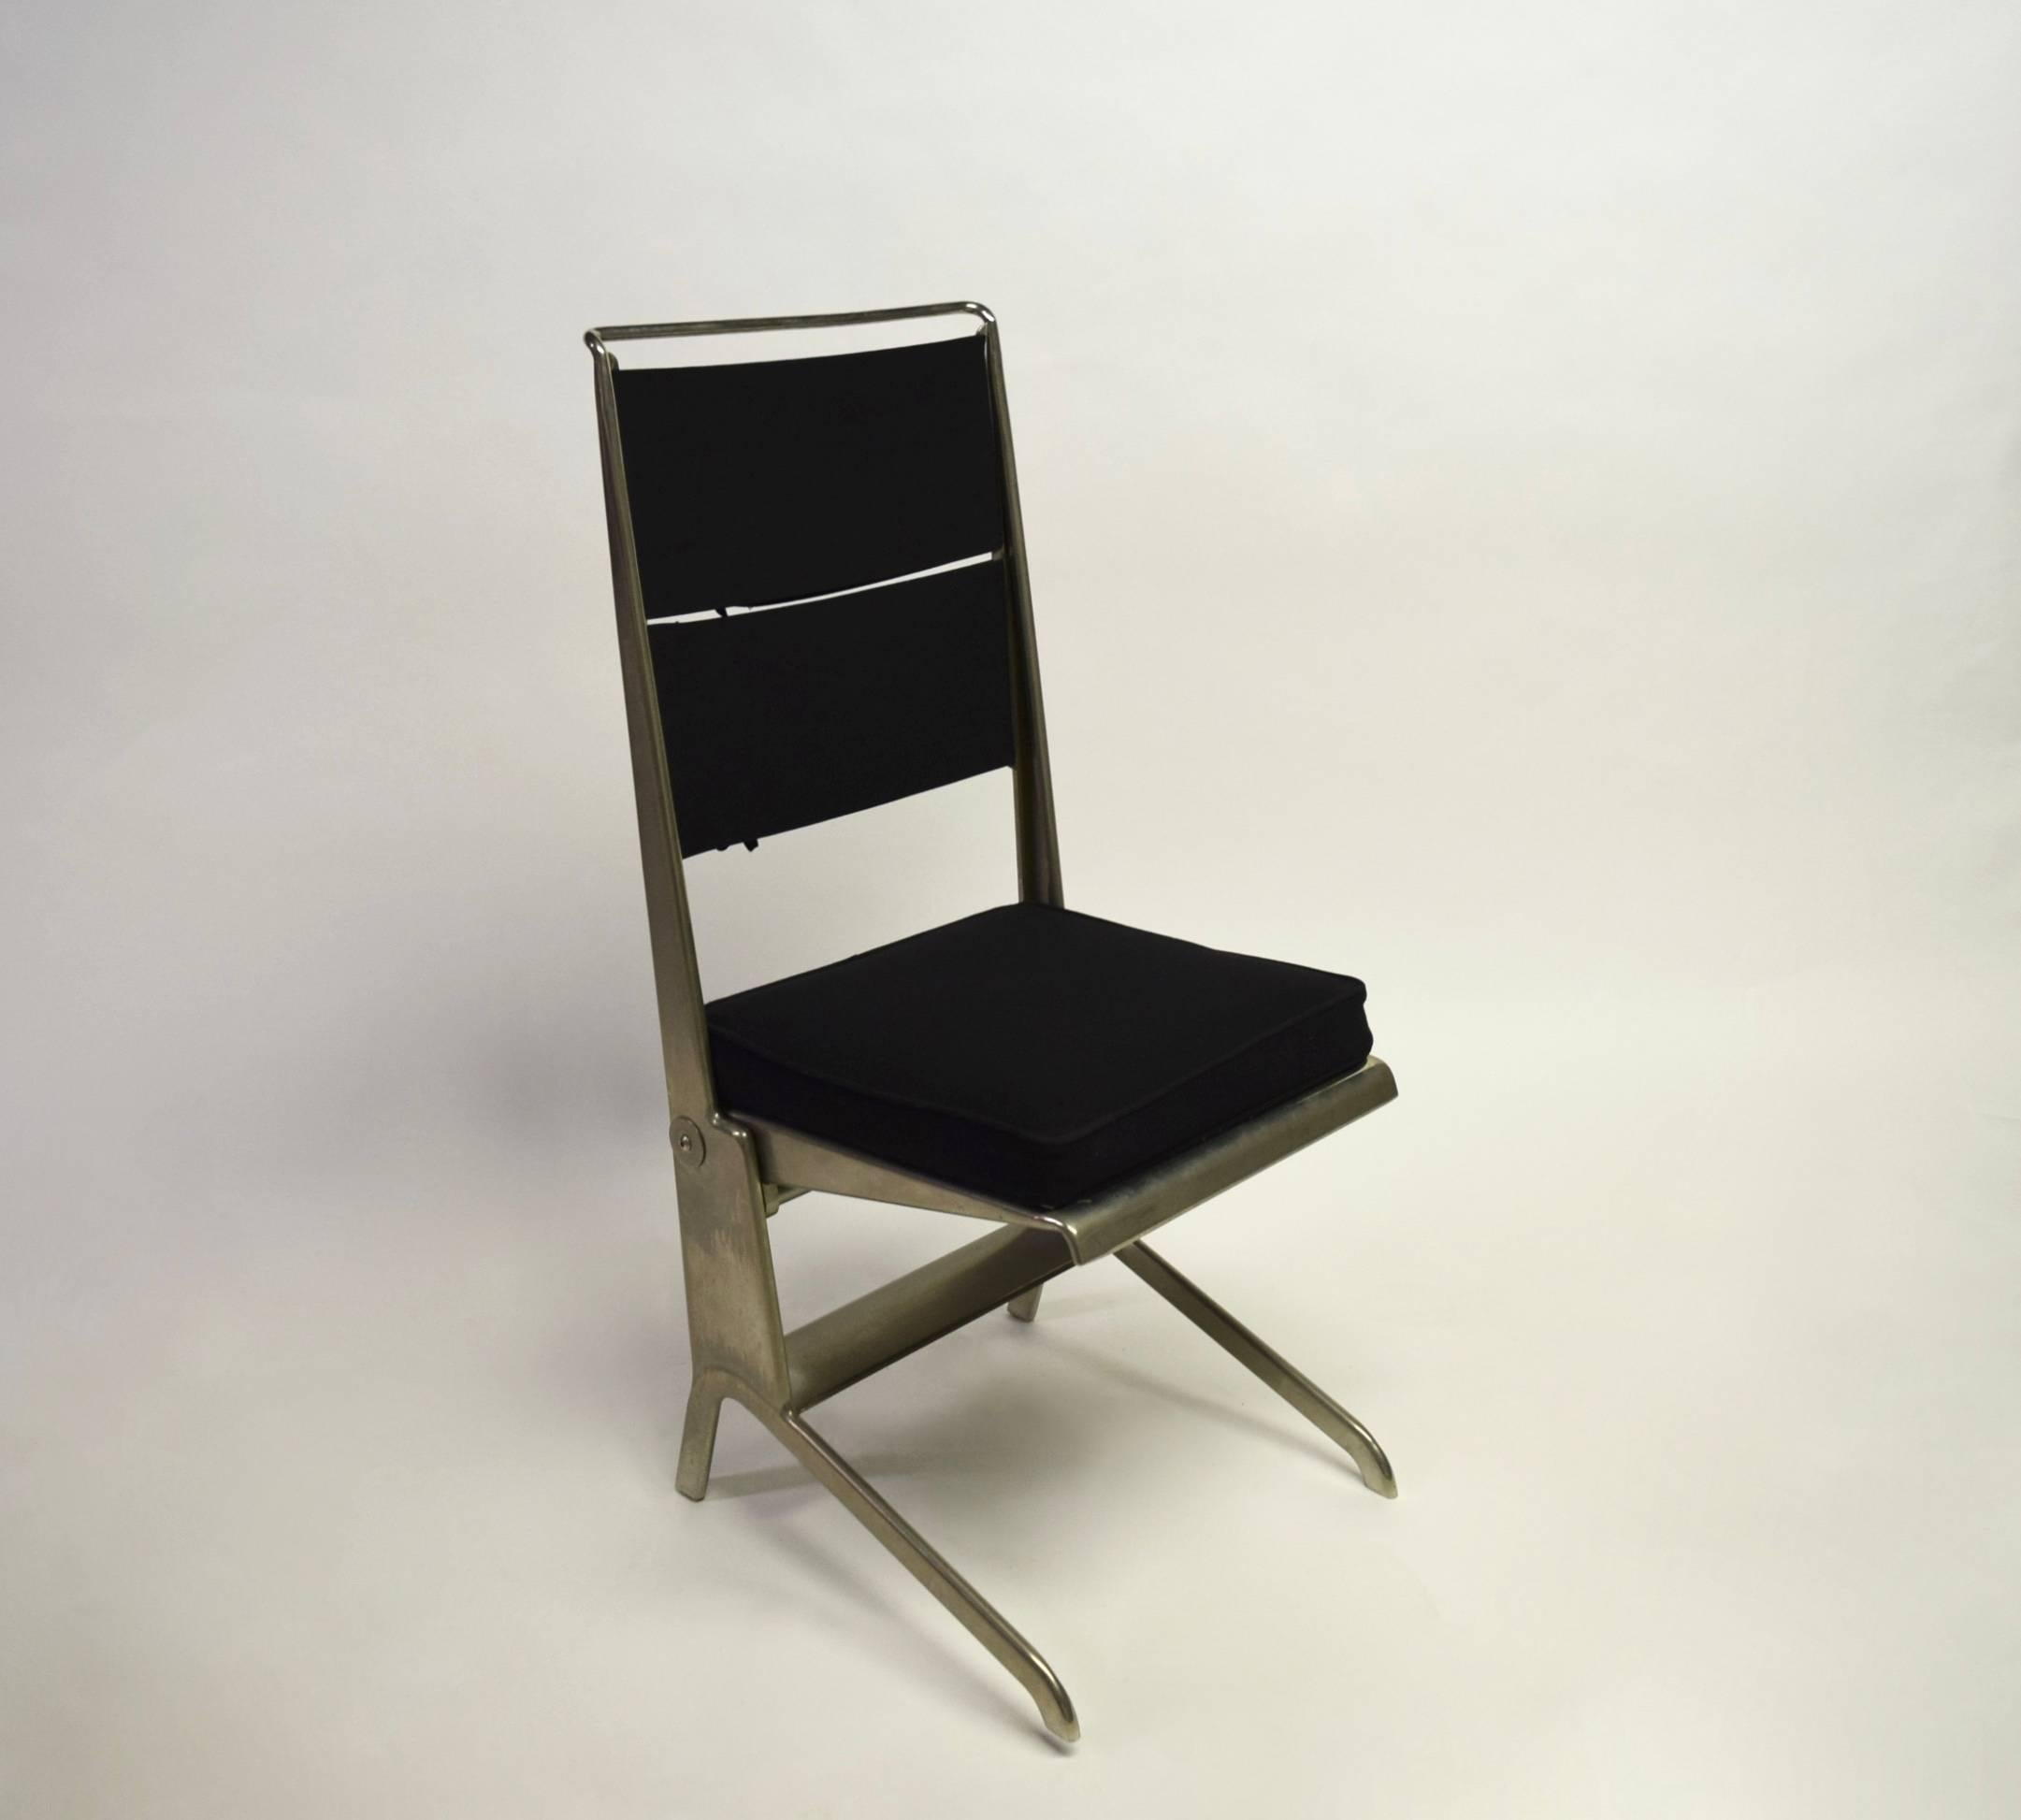 Mid-20th Century Pair of Jean Prouvé Folding Chairs Designed 1930, Manufactured by Tecta 1983